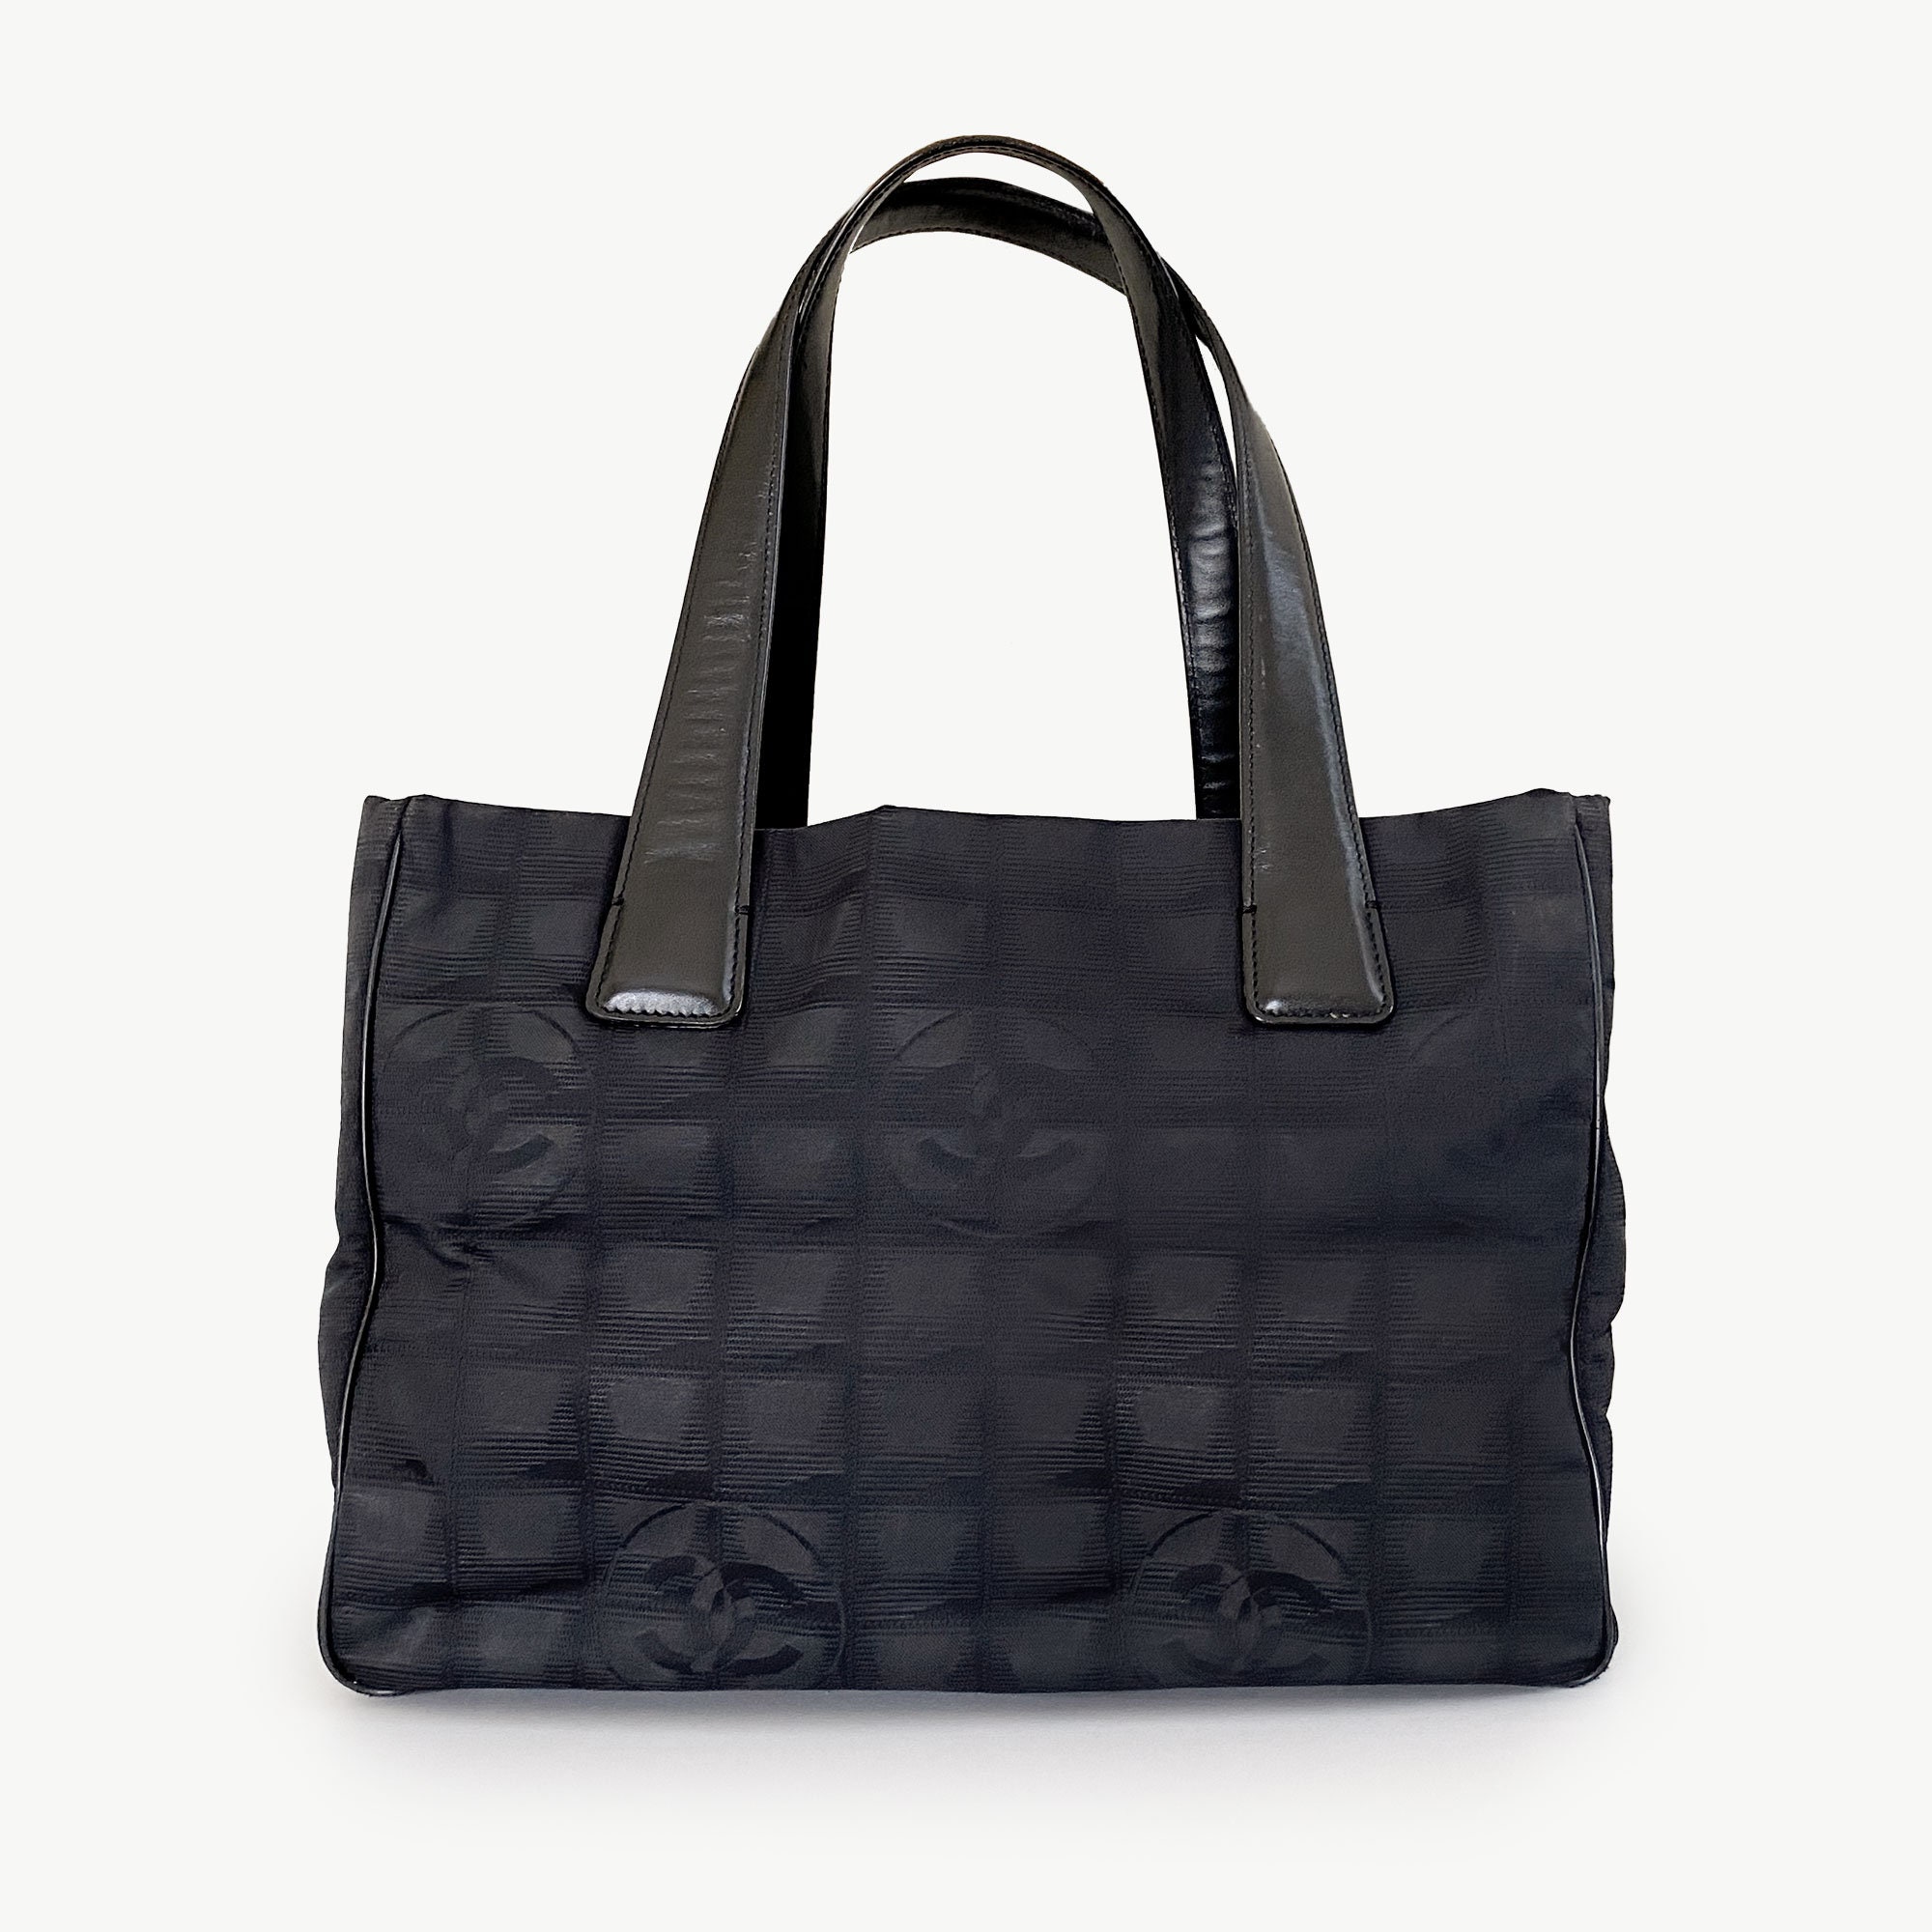 Buy Authentic CHANEL Black Quilted Nylon Medium Tote Online in India 